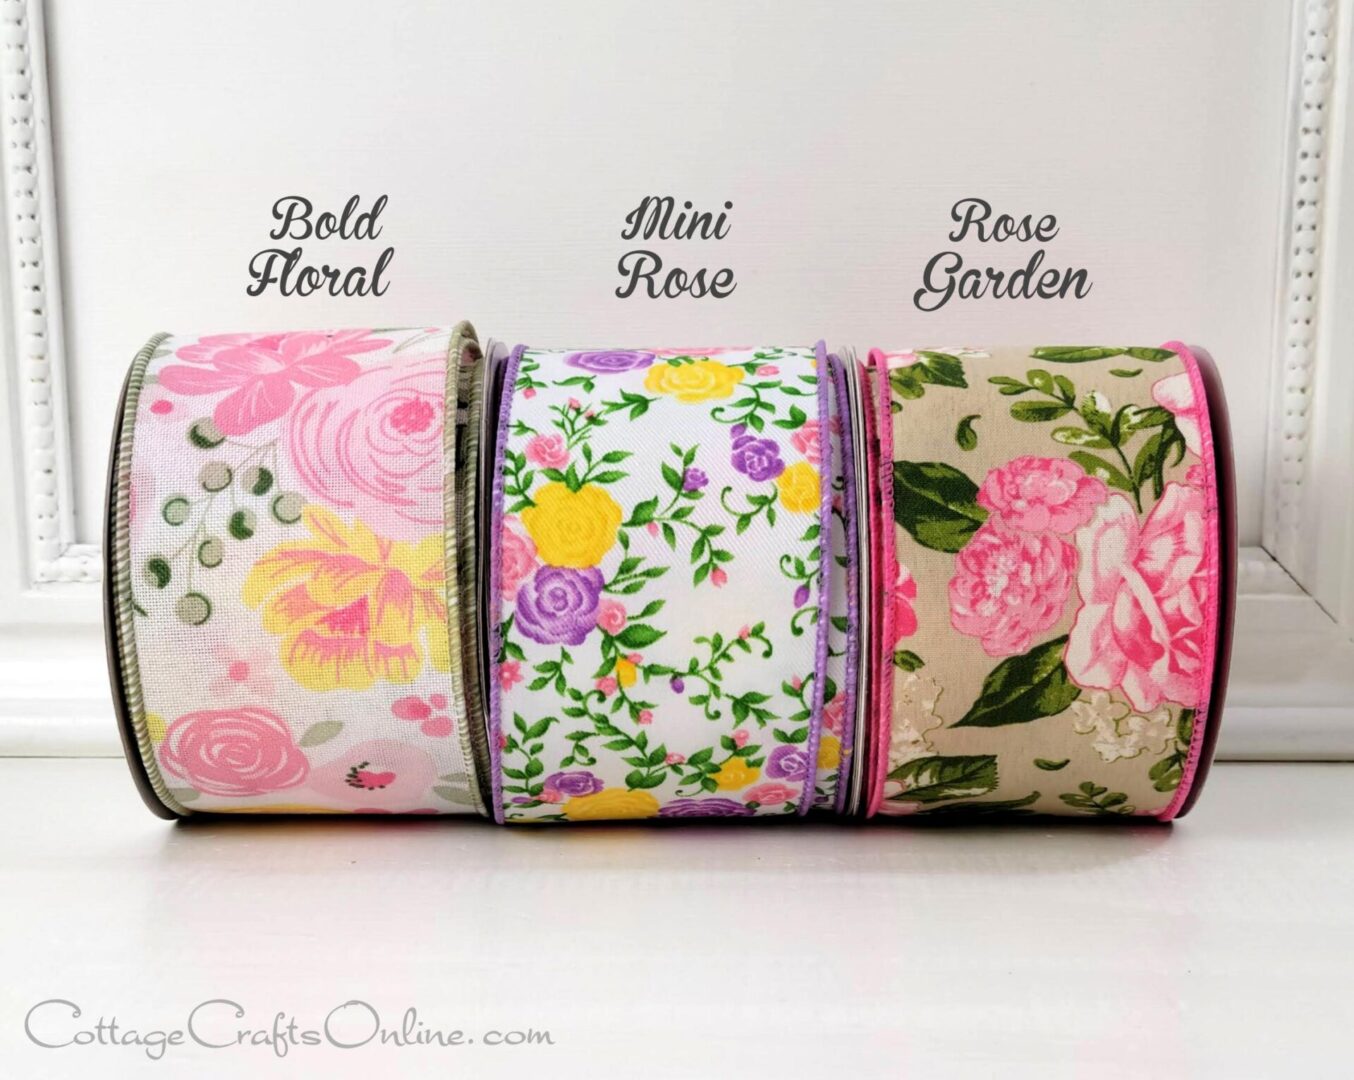 A group of three rolls of ribbon with different designs.